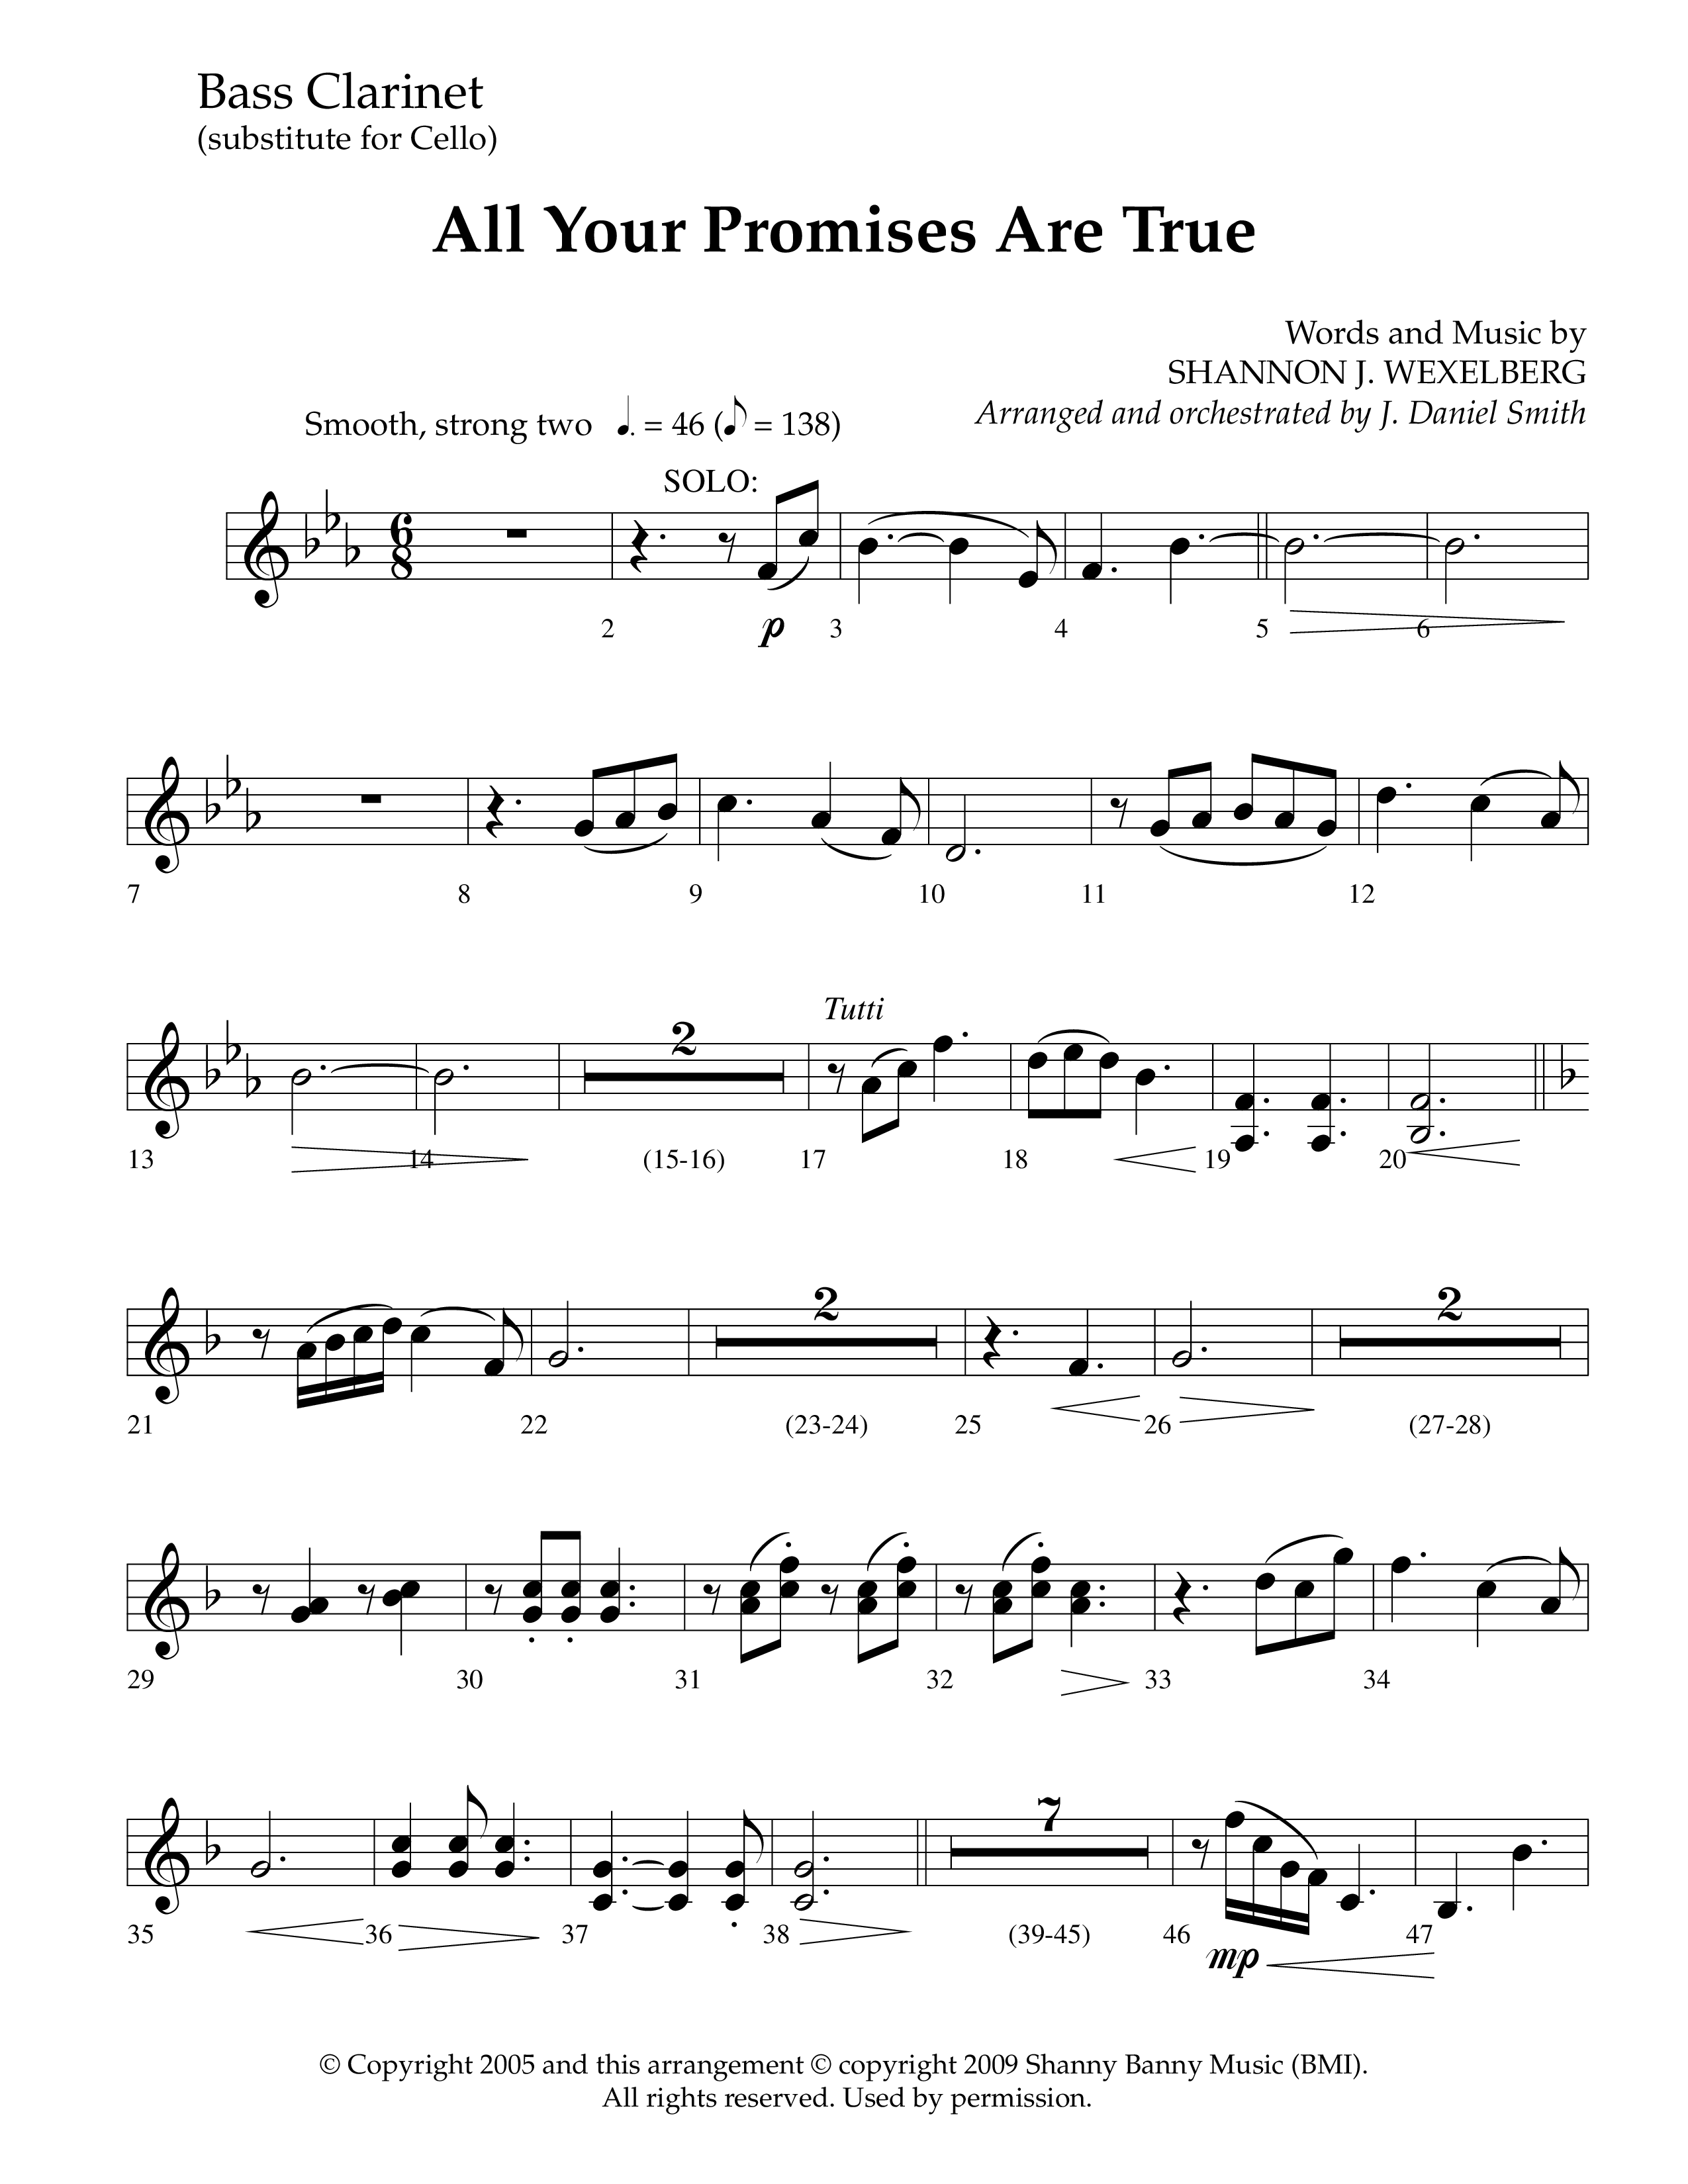 All Your Promises Are True (Choral Anthem SATB) Bass Clarinet (Lifeway Choral / Arr. J. Daniel Smith)